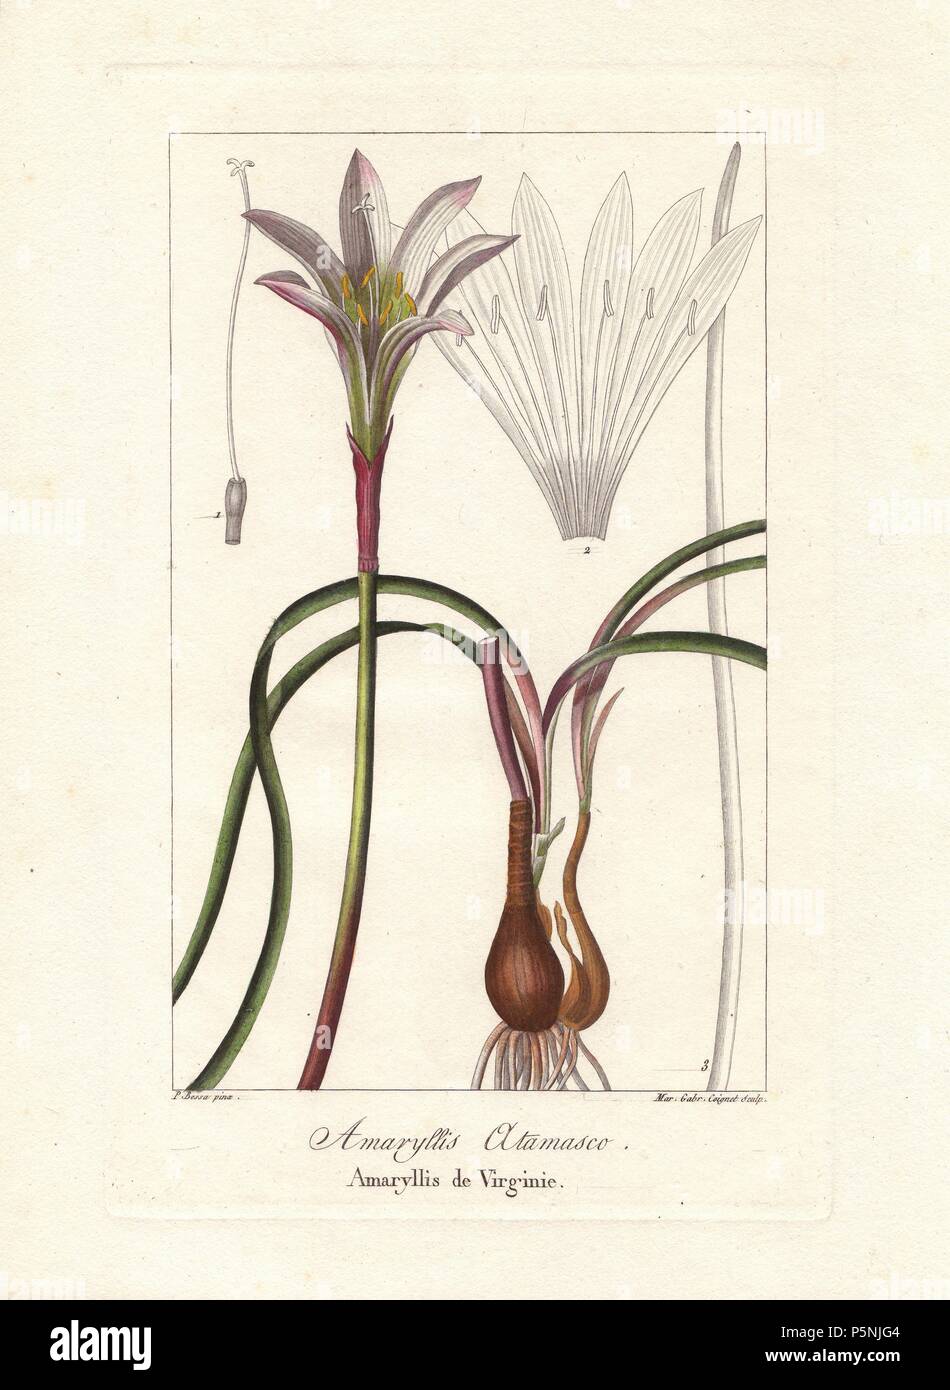 Atamasco lily, Zephryanthes atamasco, native to the eastern United States. Handcoloured stipple engraving on copper by Miss Marie Gabriel Coignet from a botanical illustration by Pancrace Bessa from Mordant de Launay's 'Herbier General de l'Amateur,' Audot, Paris, 1820. The Herbier was published from 1810 to 1827 and edited by Mordant de Launay and Loiseleur-Deslongchamps. Bessa (1772-1830s), along with Redoute and Turpin, is considered one of the greatest French botanical artists of the 19th century. The engraver Miss Coignet was born in Paris in 1793, and studied under Naigeon and Massard. Stock Photo